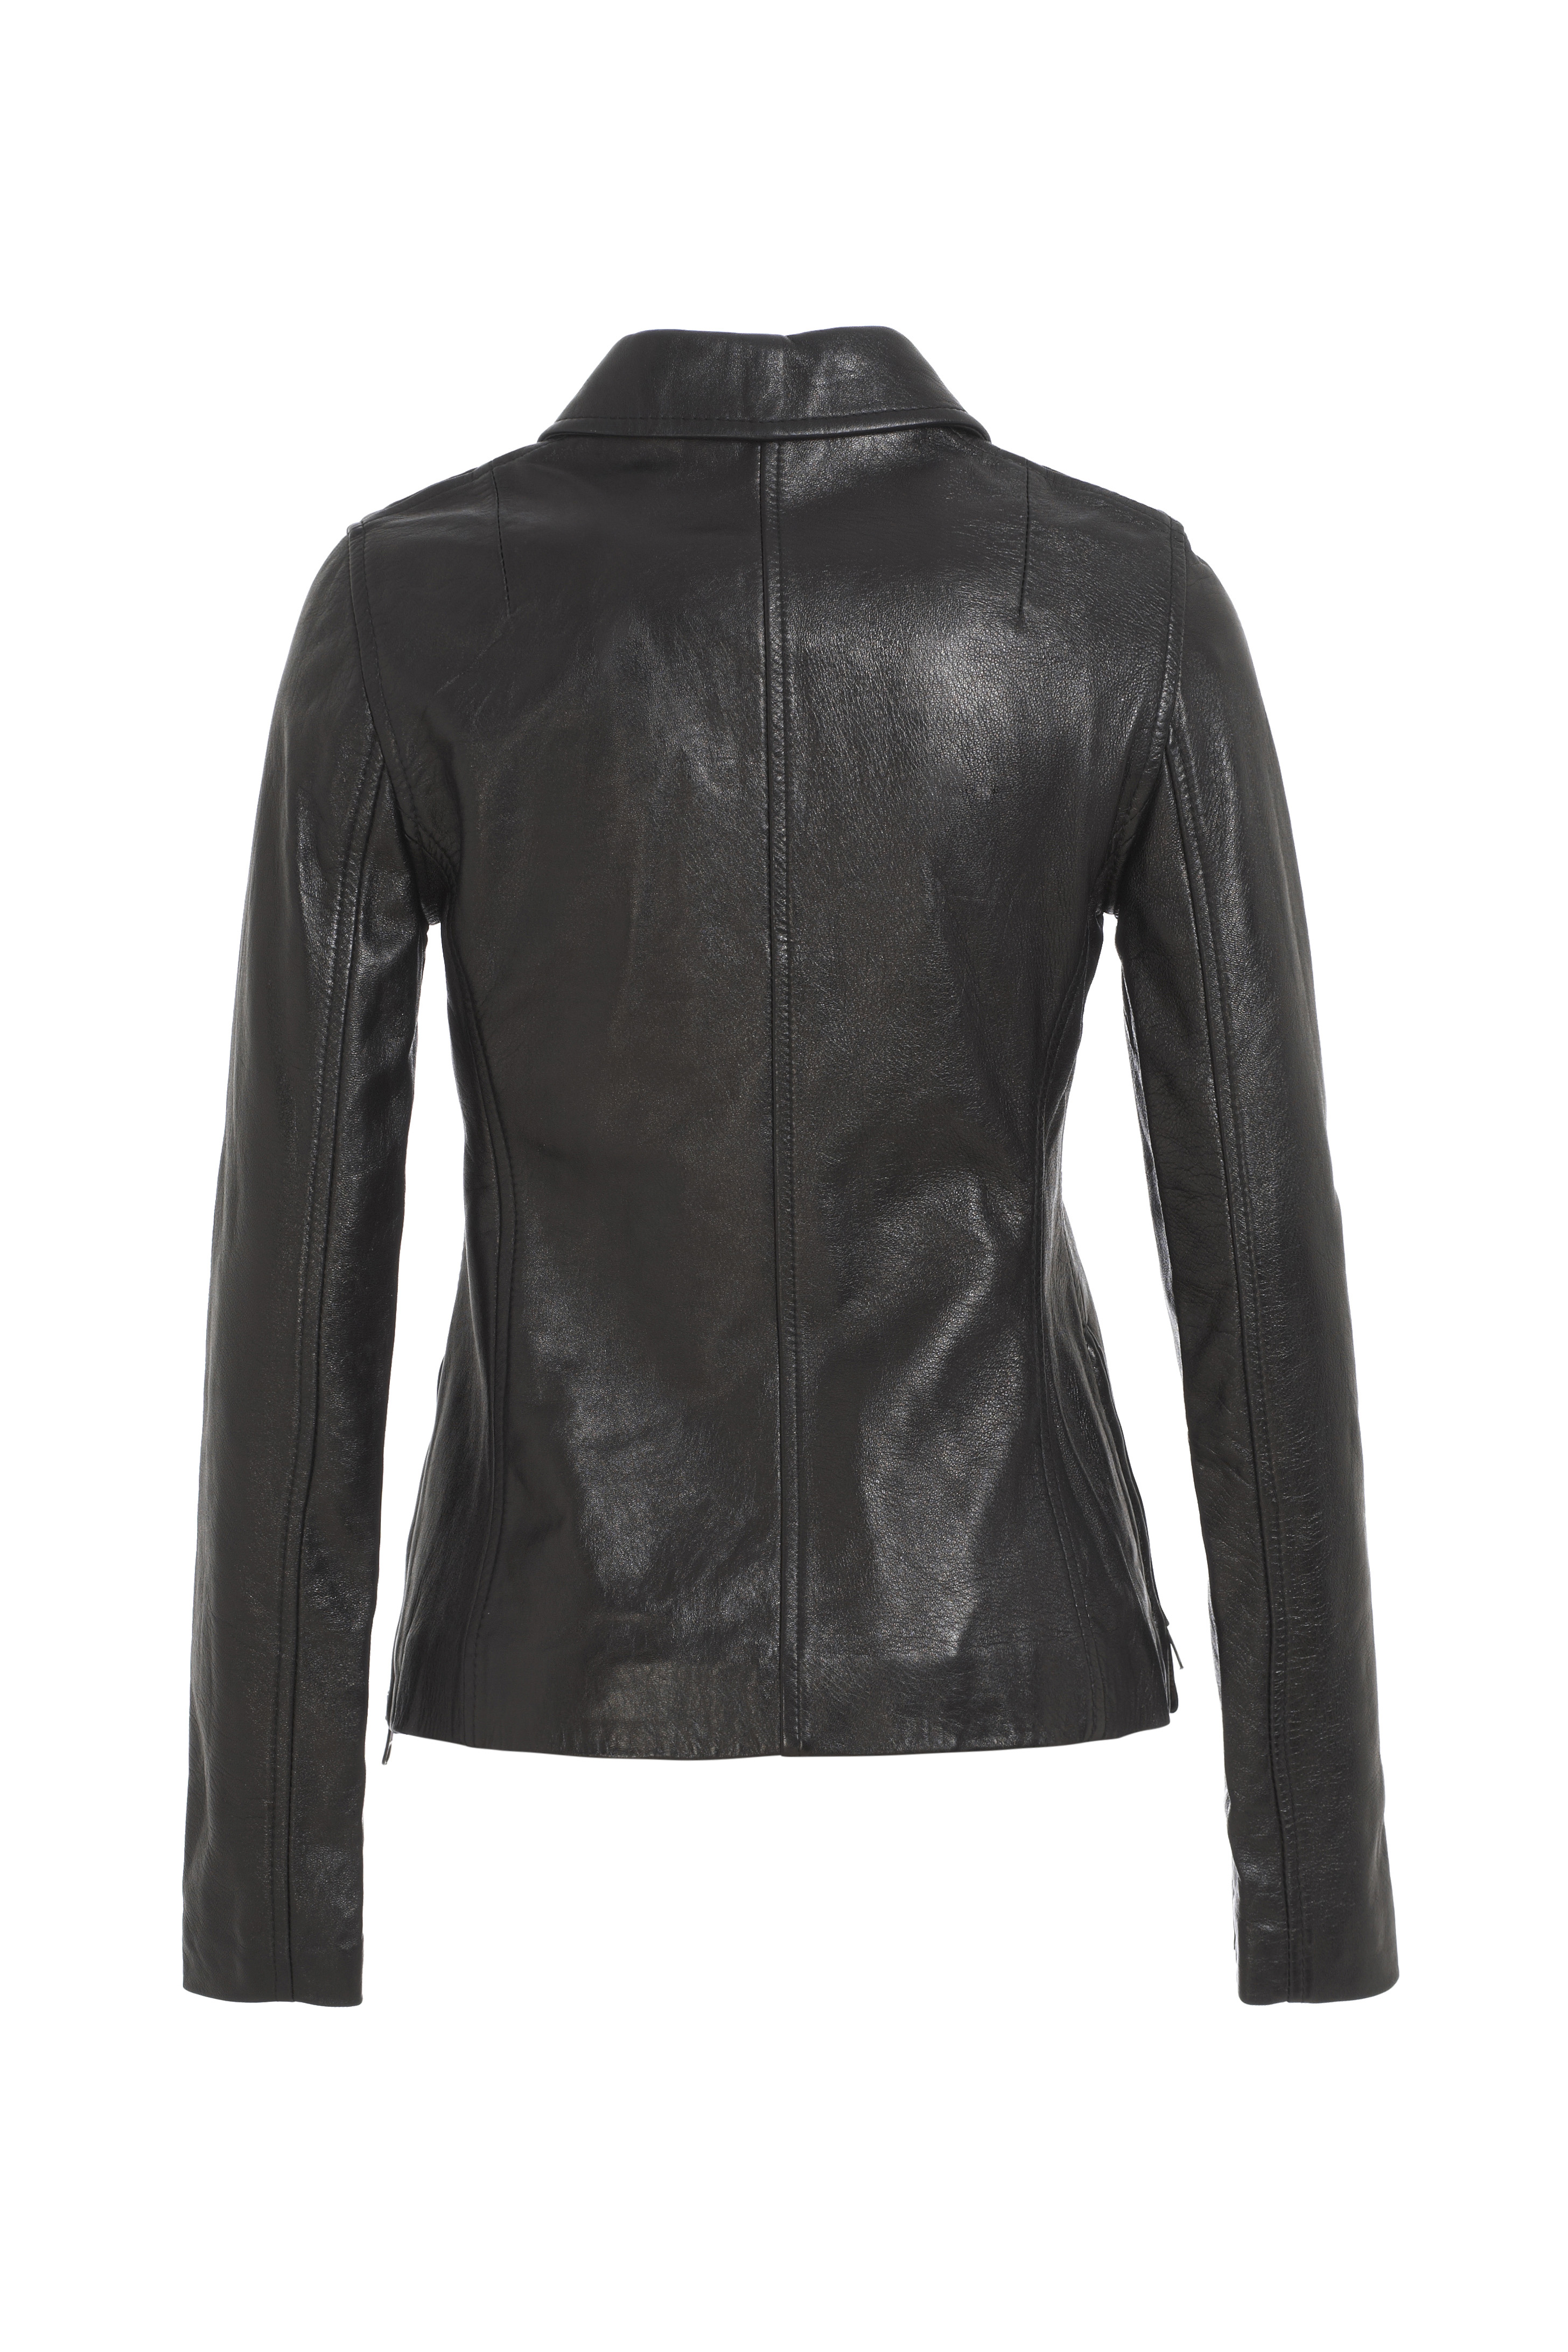 Dolce & Gabbana black leather jacket | Curate8